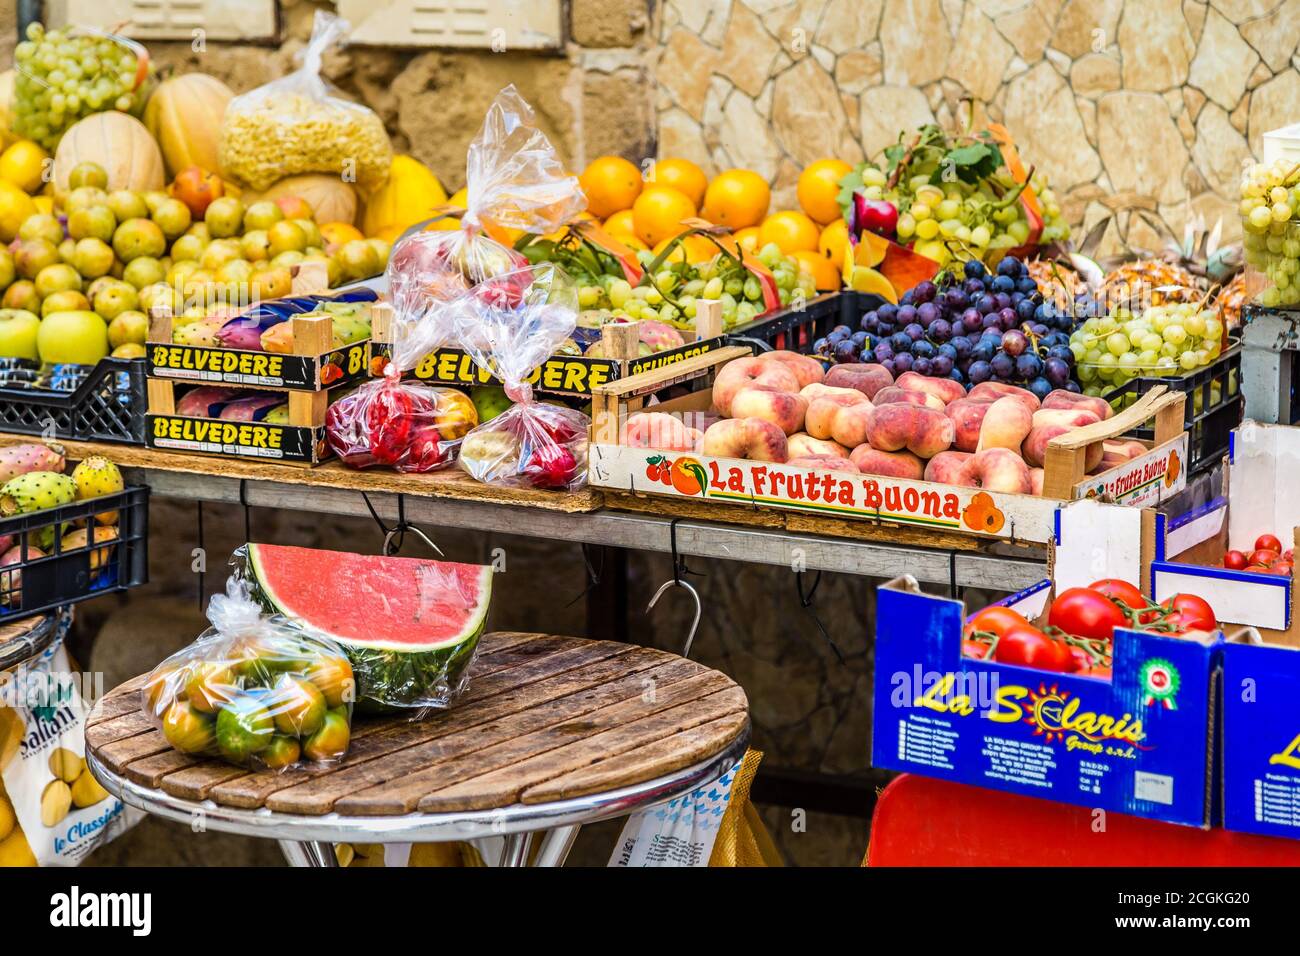 BARI, ITALY - SEPTEMBER 1, 2020: light is enlightening fruit for sale in stall in Bari Vecchia, the old town of Bari Stock Photo